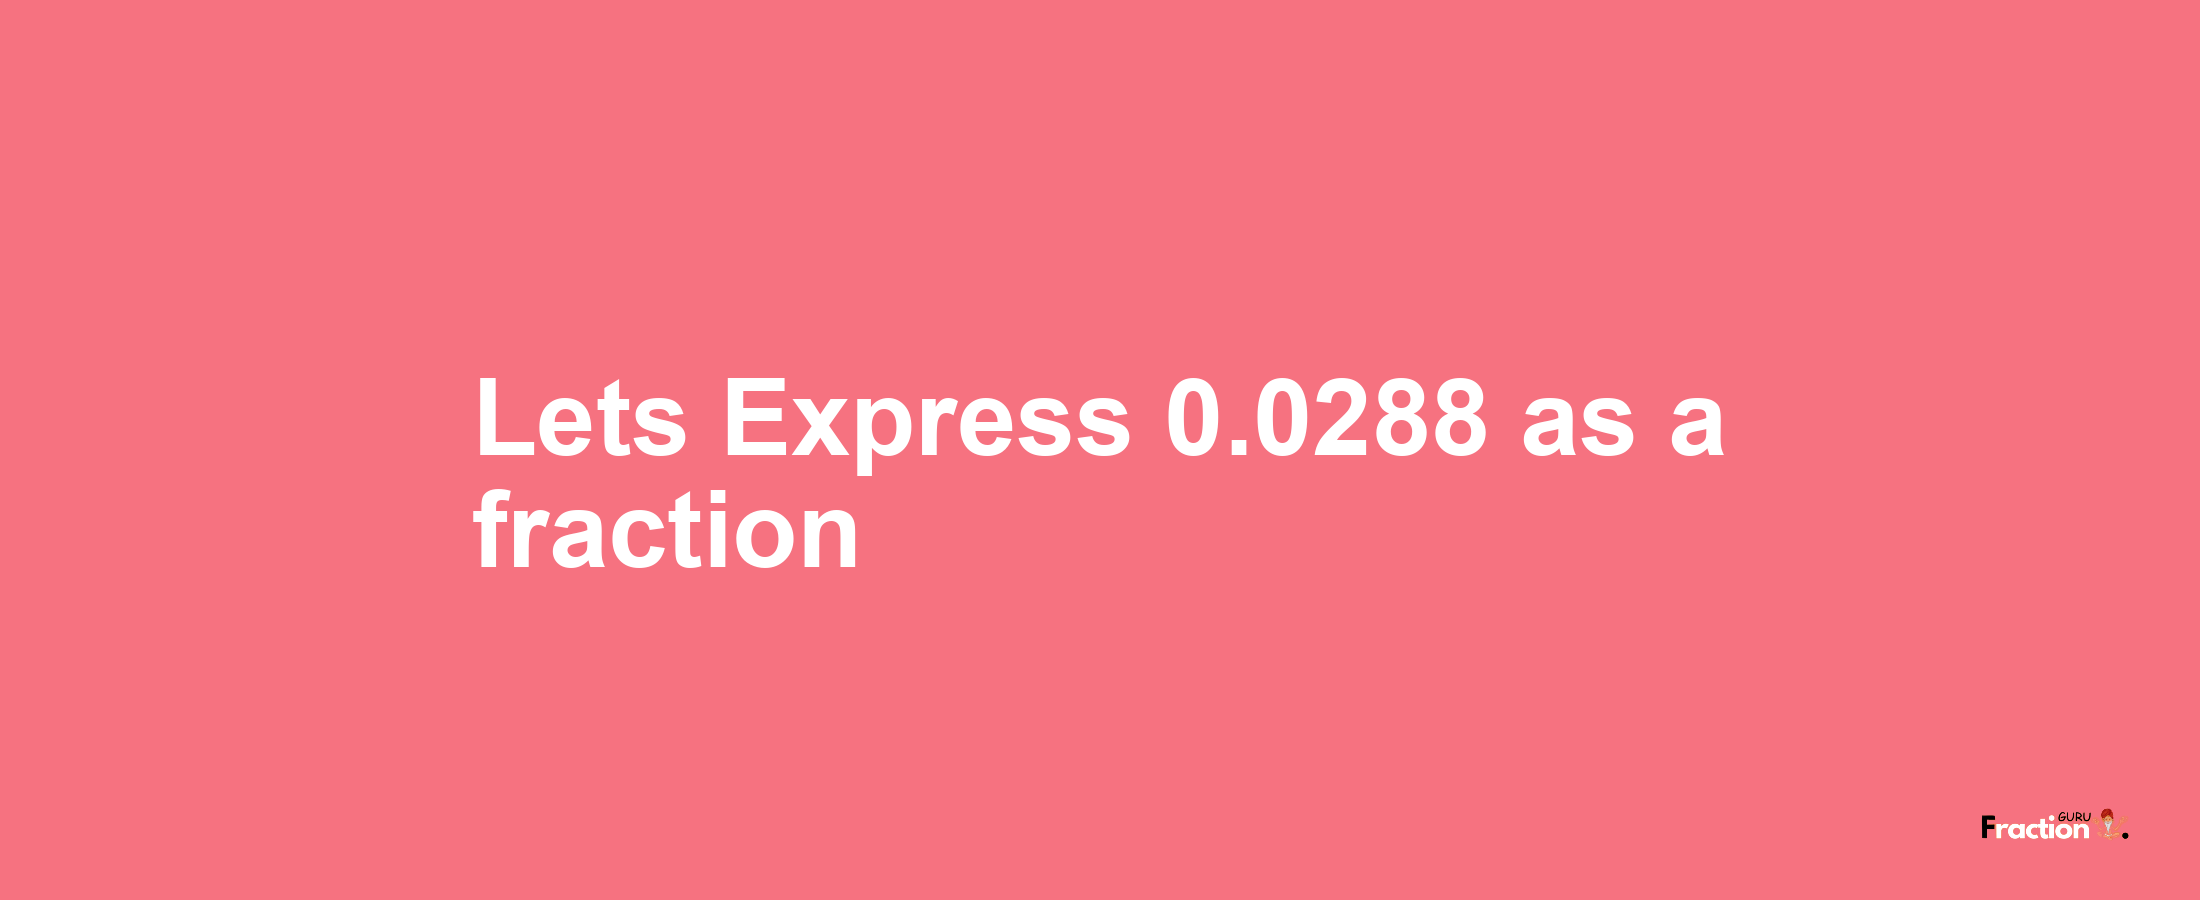 Lets Express 0.0288 as afraction